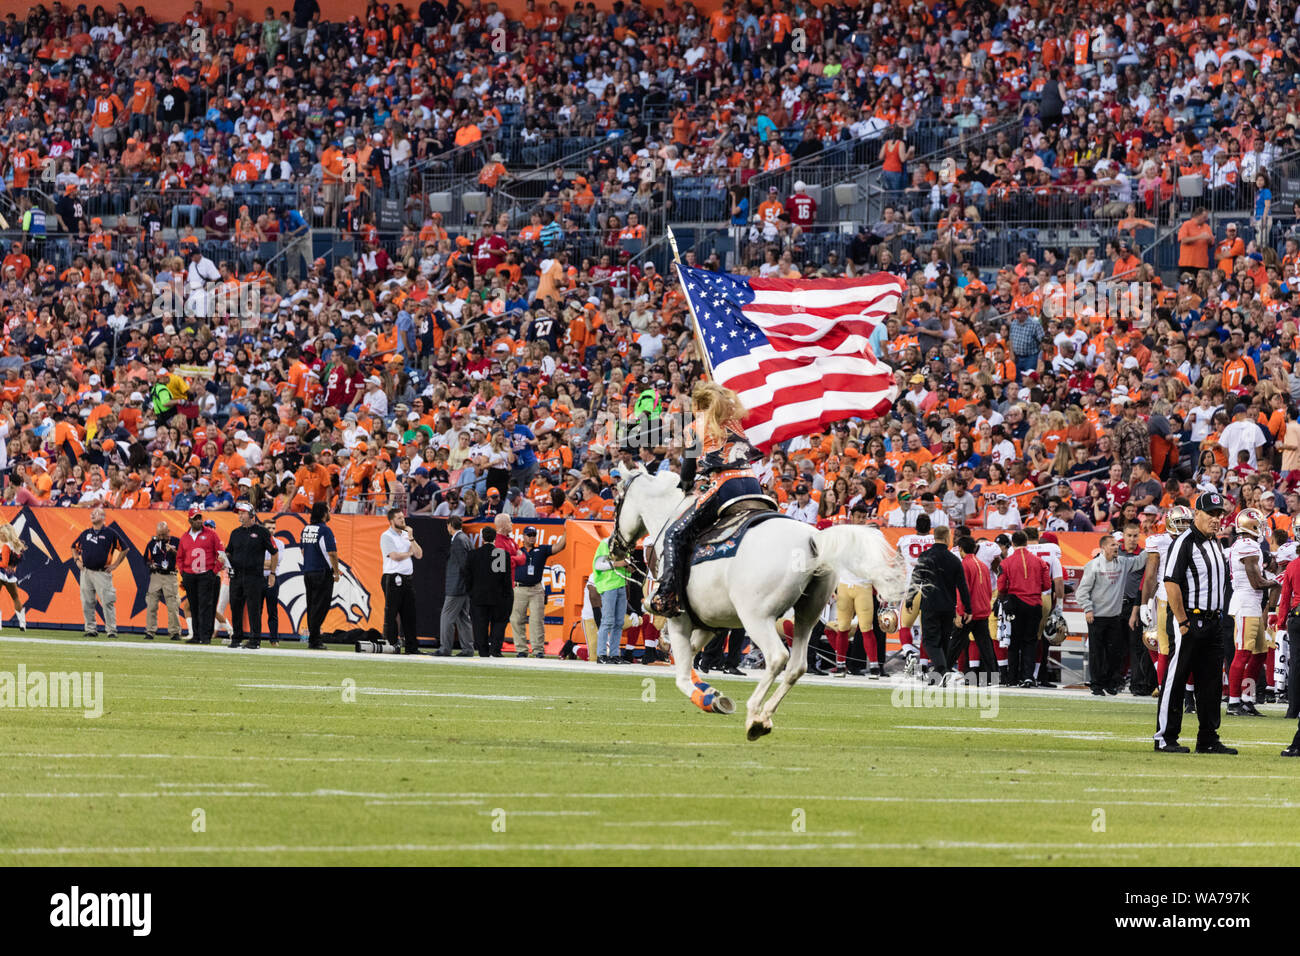 A  woman rides a white stallion across the field to celebrate a Denver Broncos touchdown during the team's National Football League game against the visiting San Francisco 49ers at the Sports Authority Field at Mile High stadium, Denver, Colorado Stock Photo